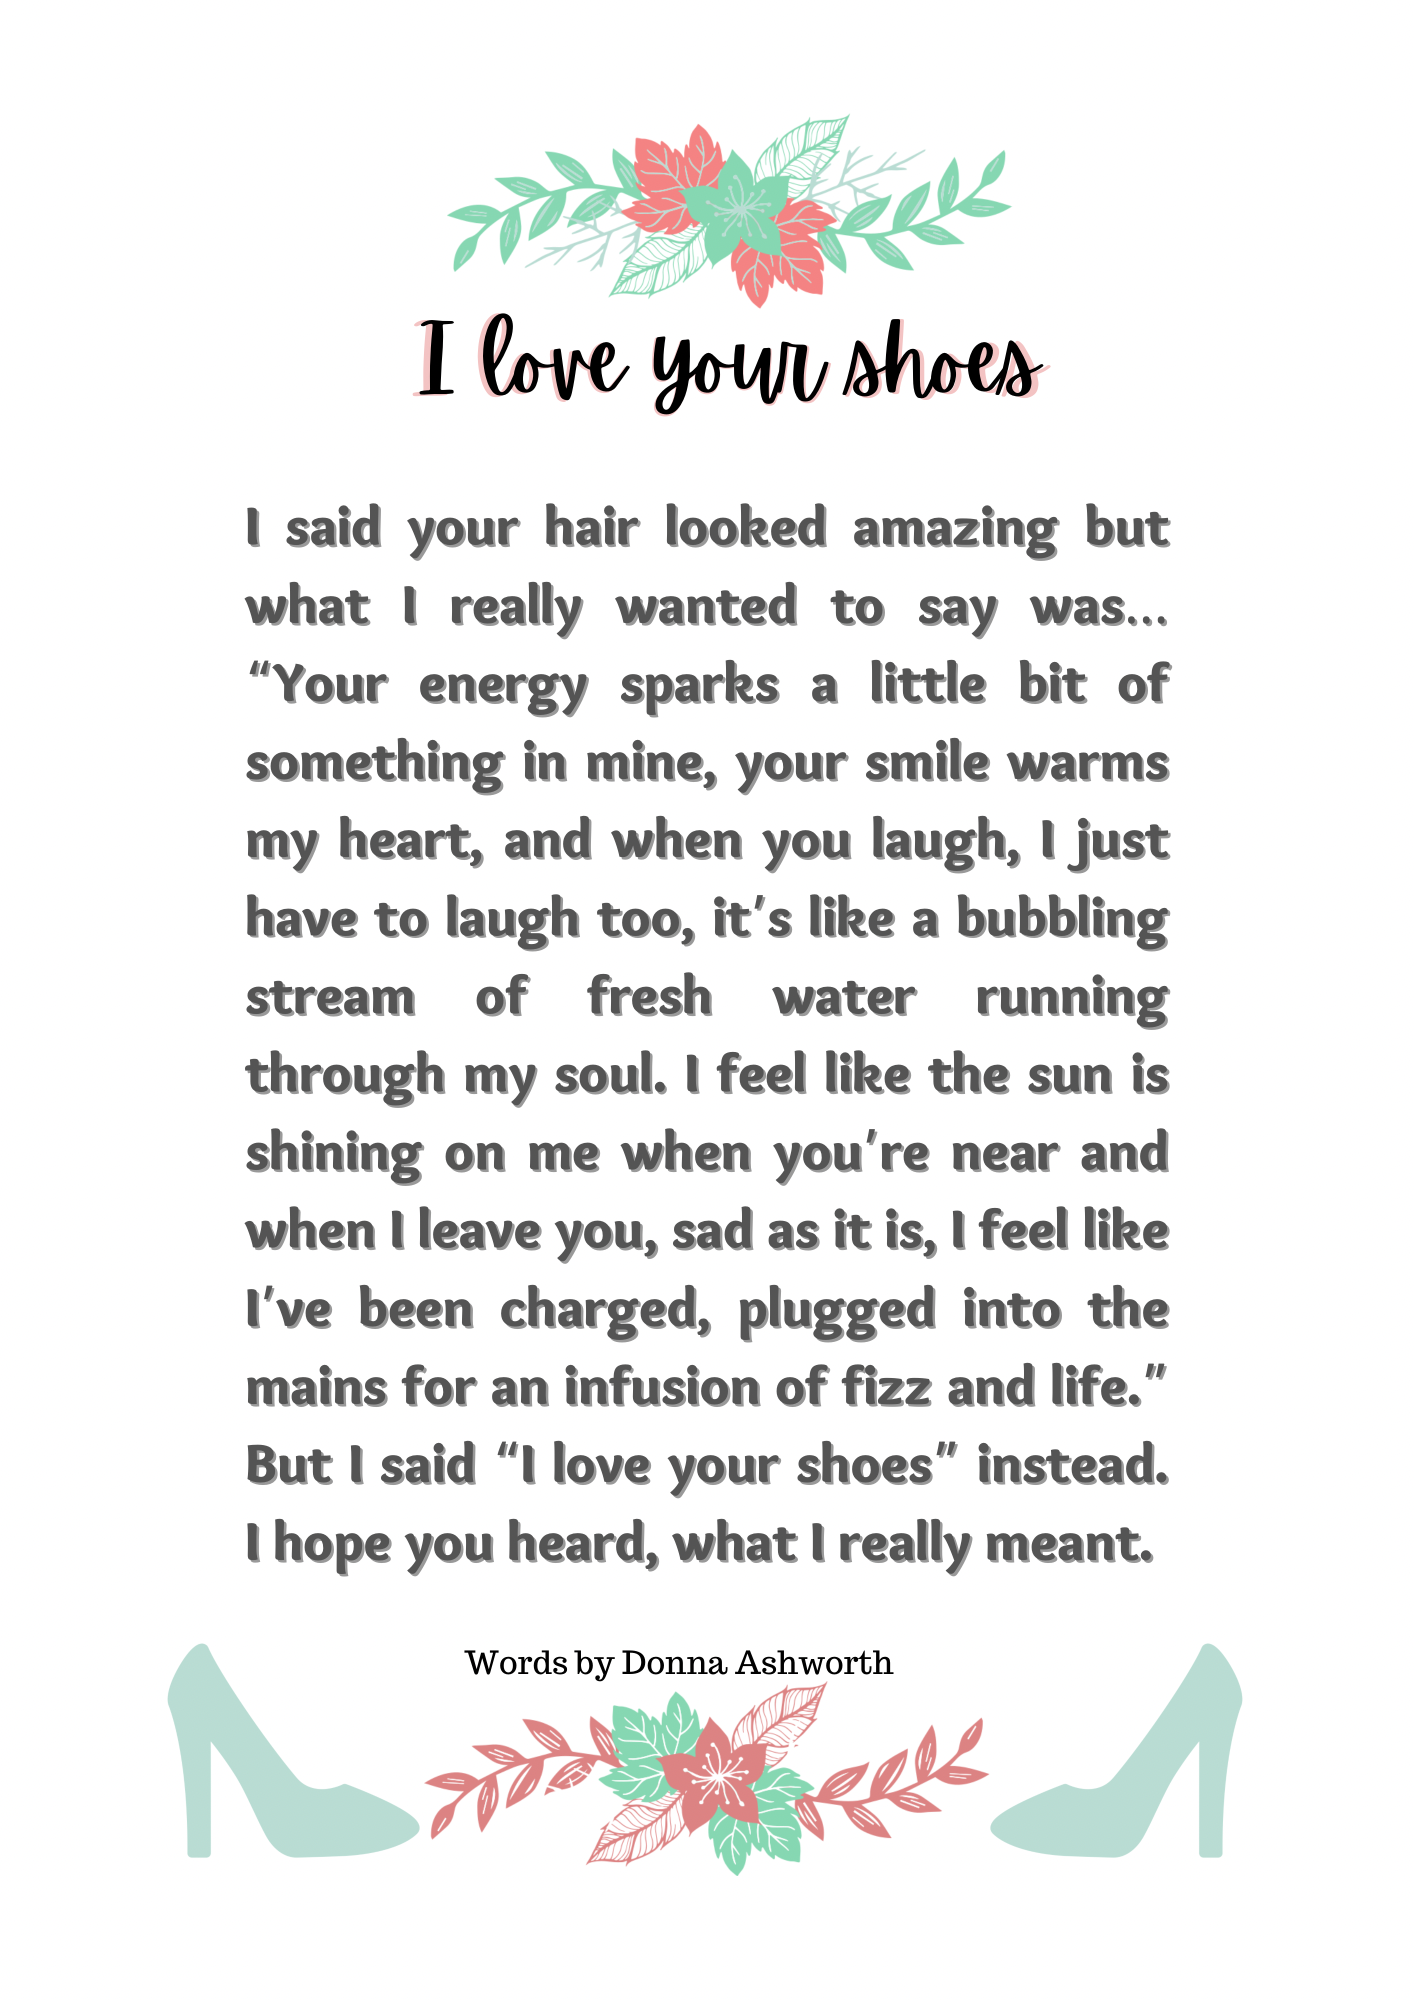 I Love Your Shoes - Printable – Donna Ashworth Words